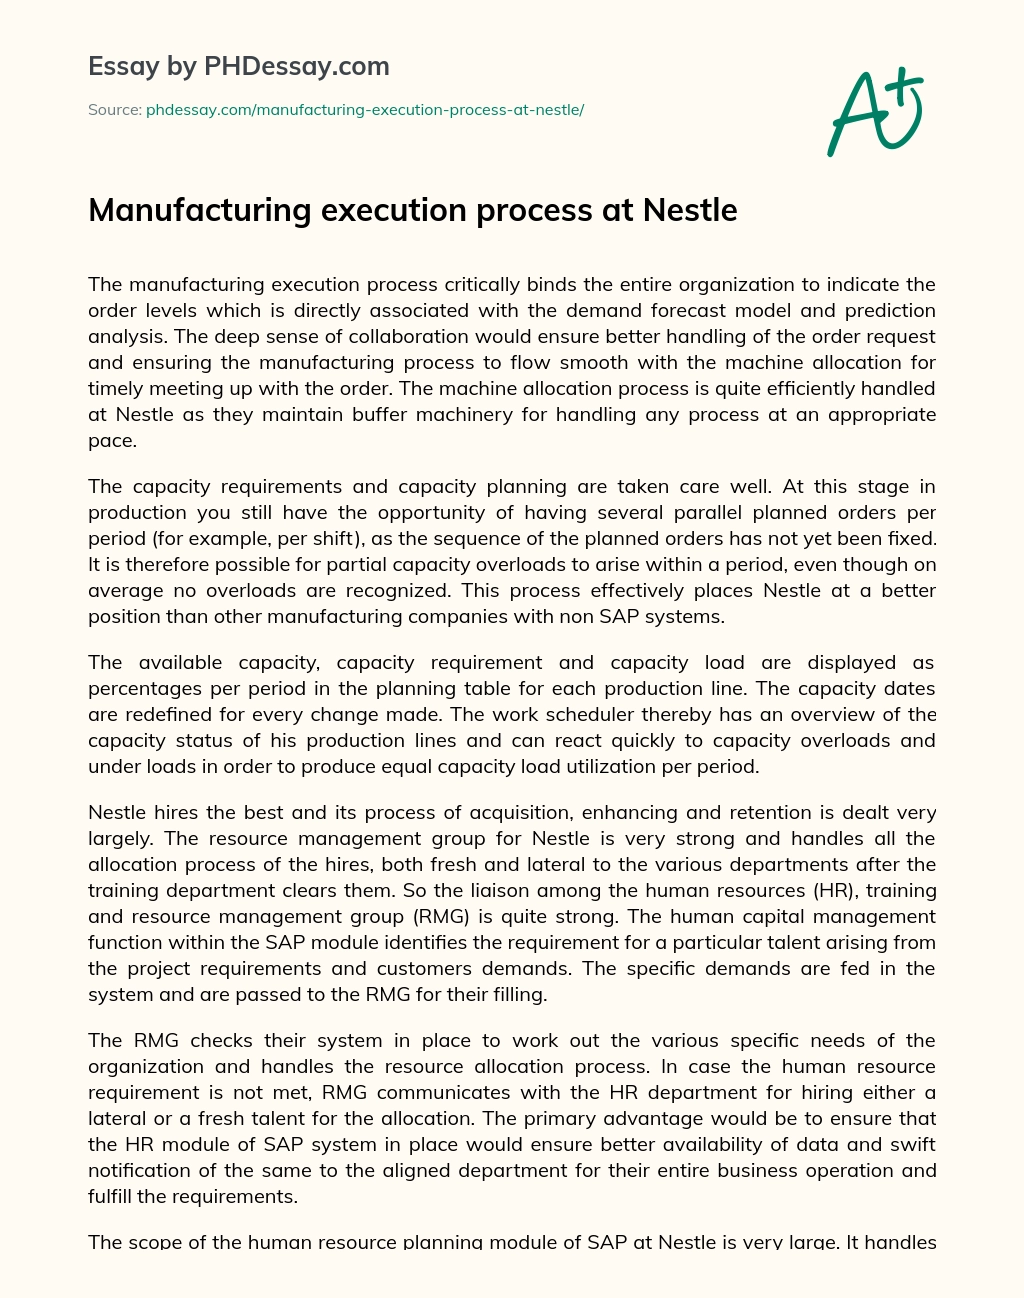 Manufacturing execution process at Nestle essay